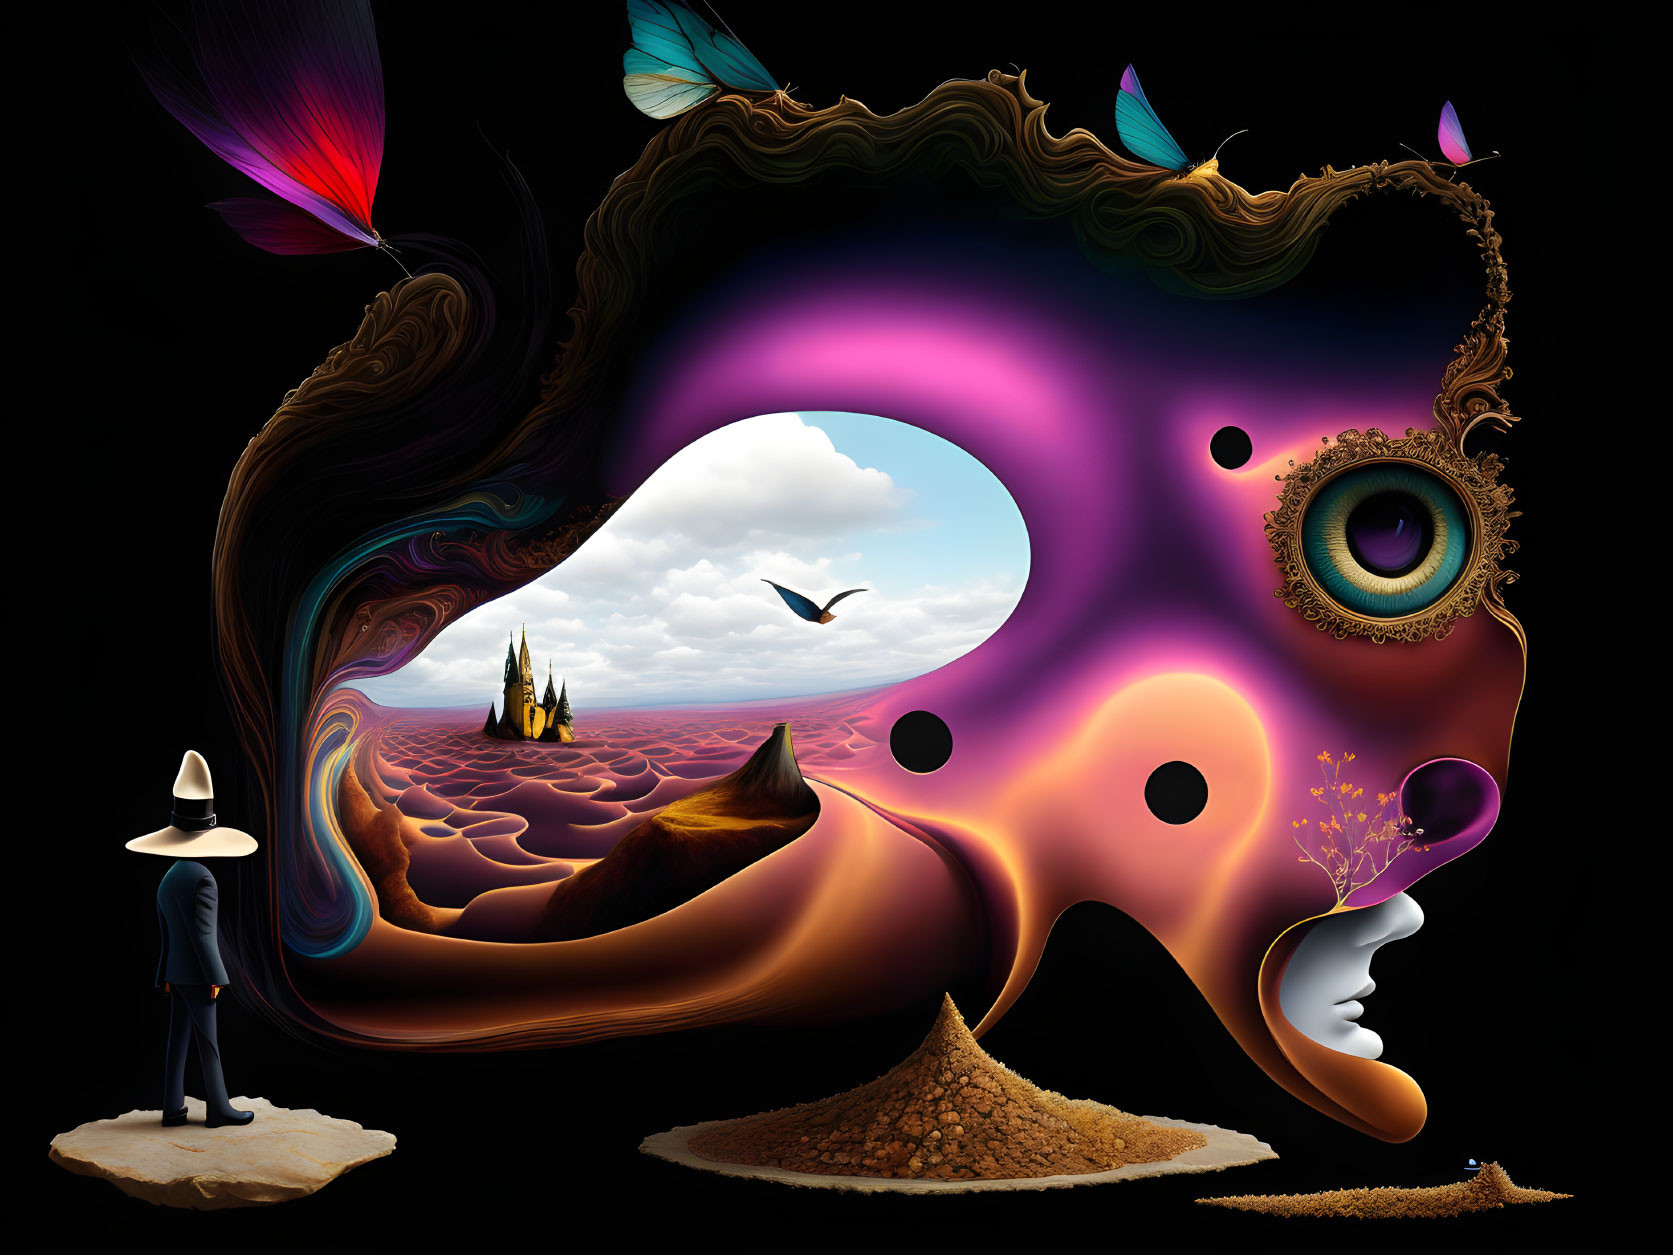 Surreal profile illustration with fantastical face and vibrant colors.